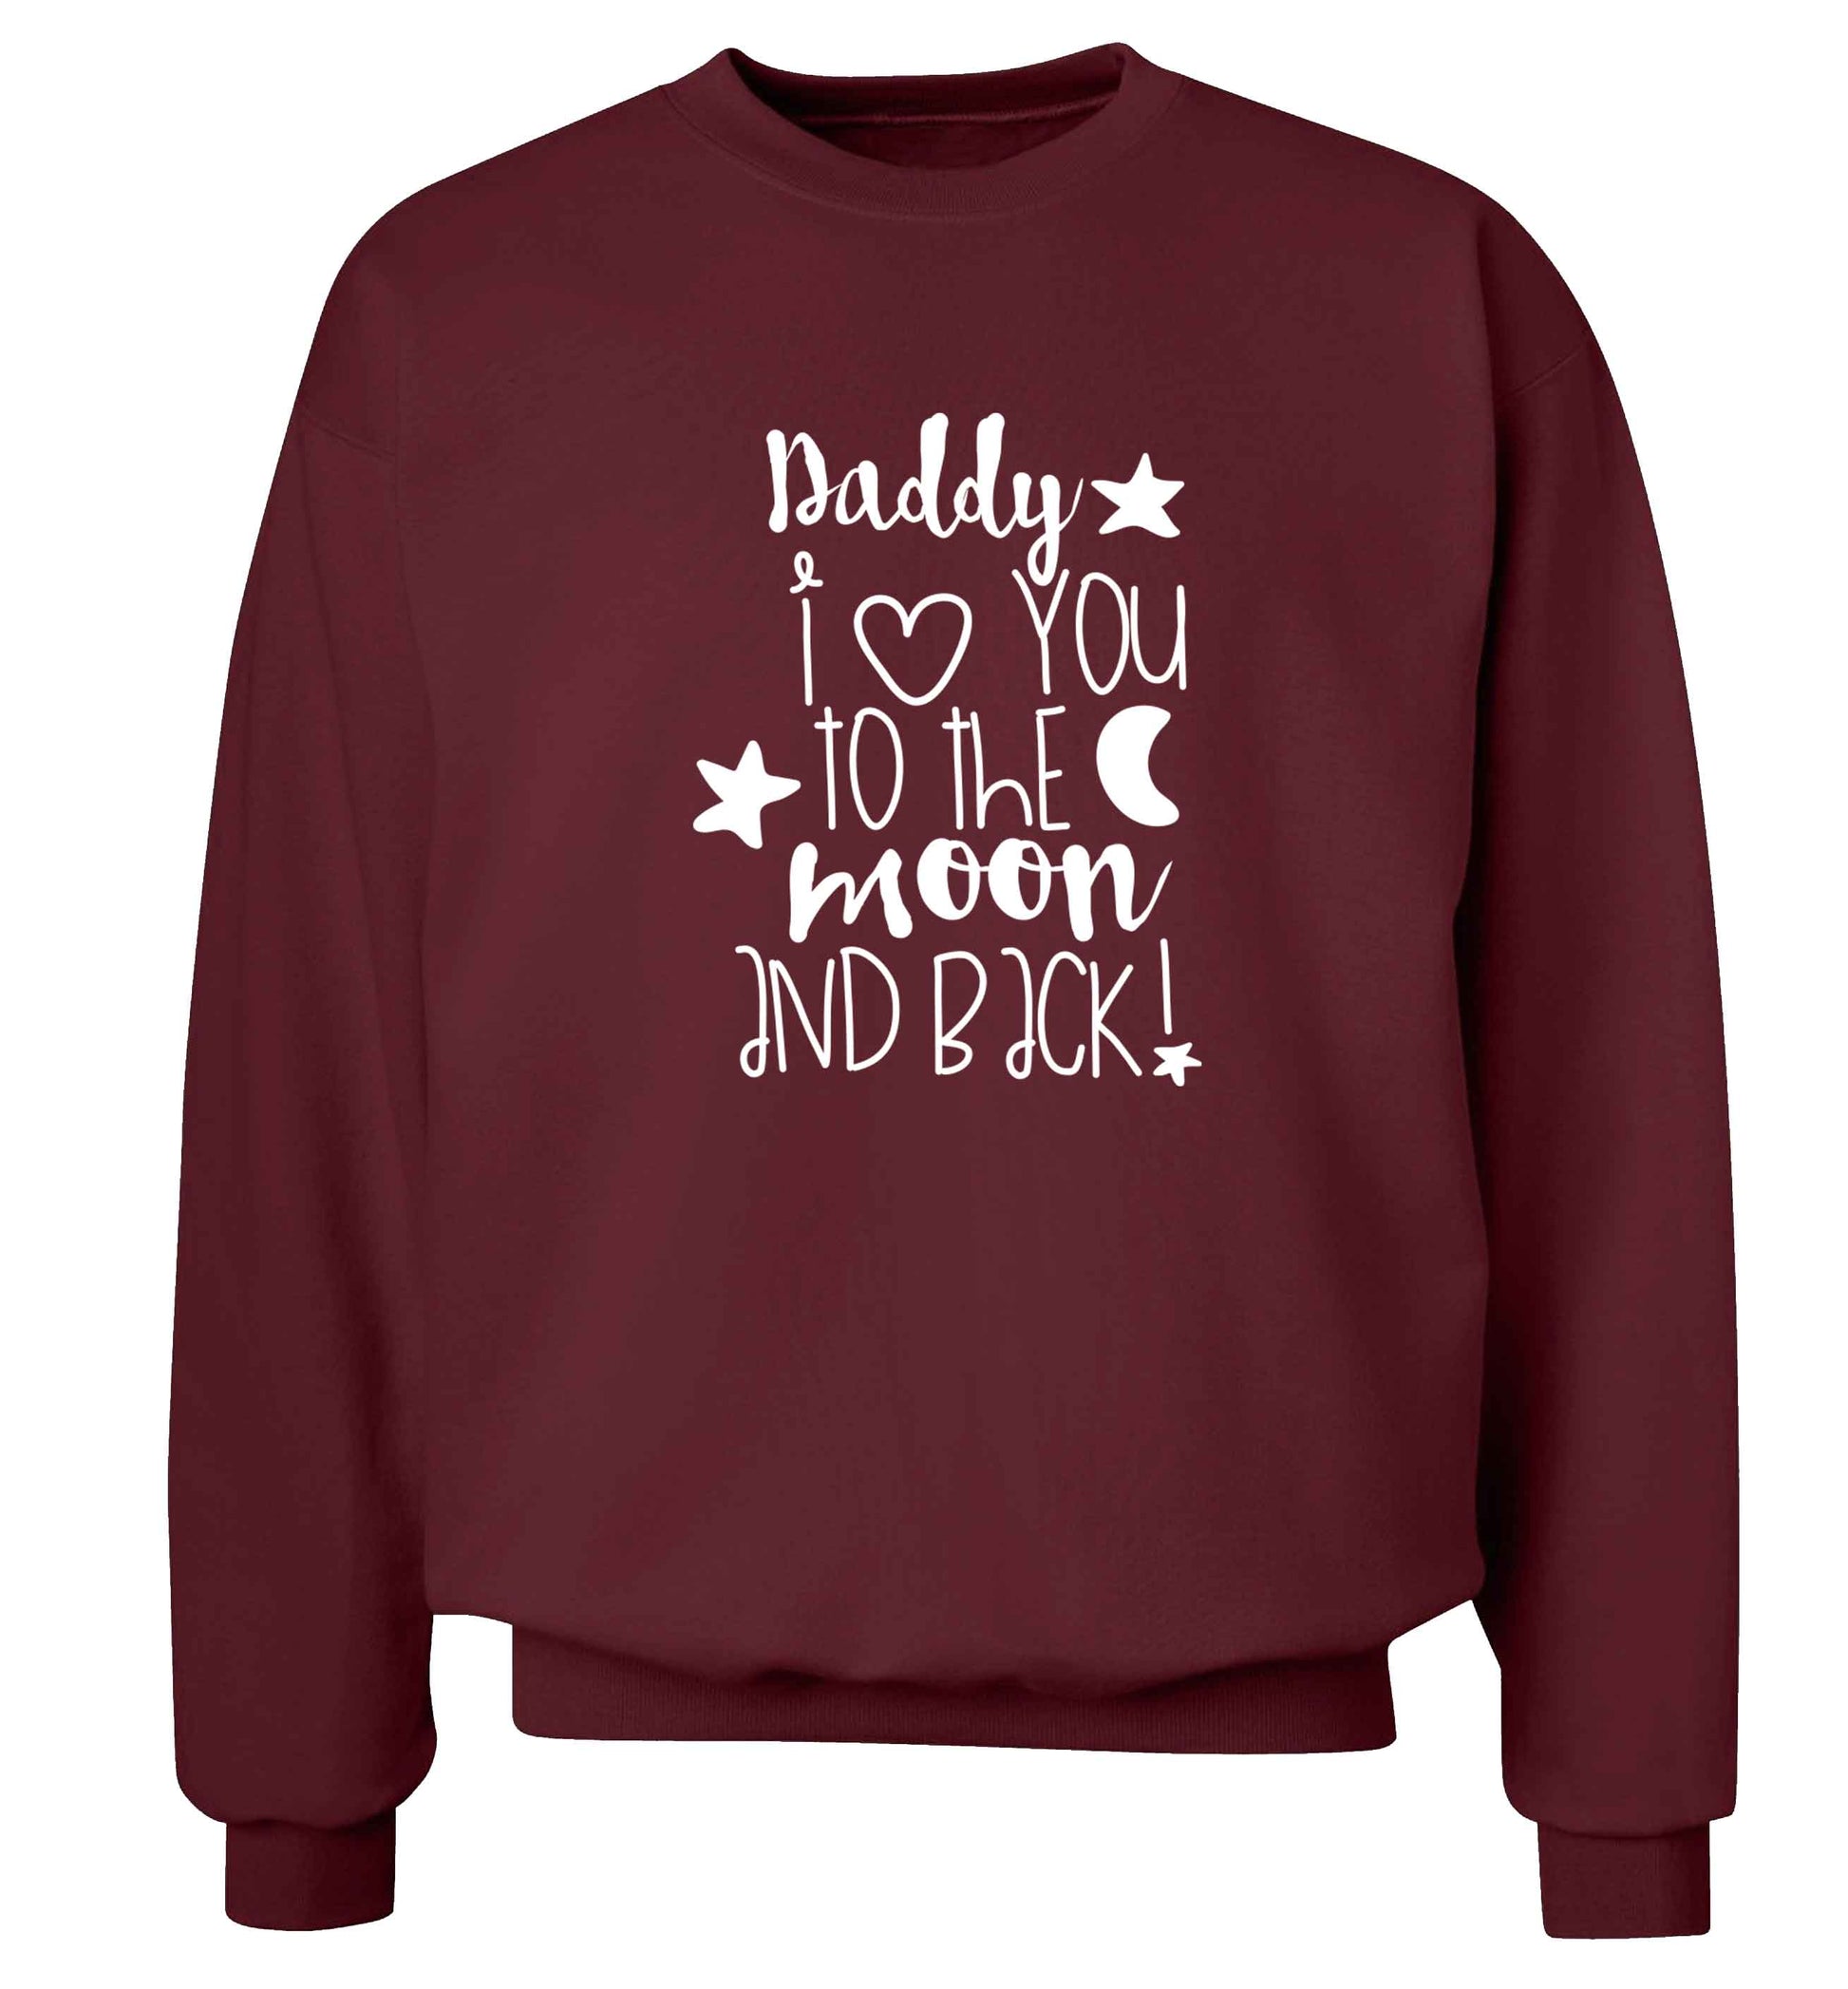 Daddy I love you to the moon and back adult's unisex maroon sweater 2XL